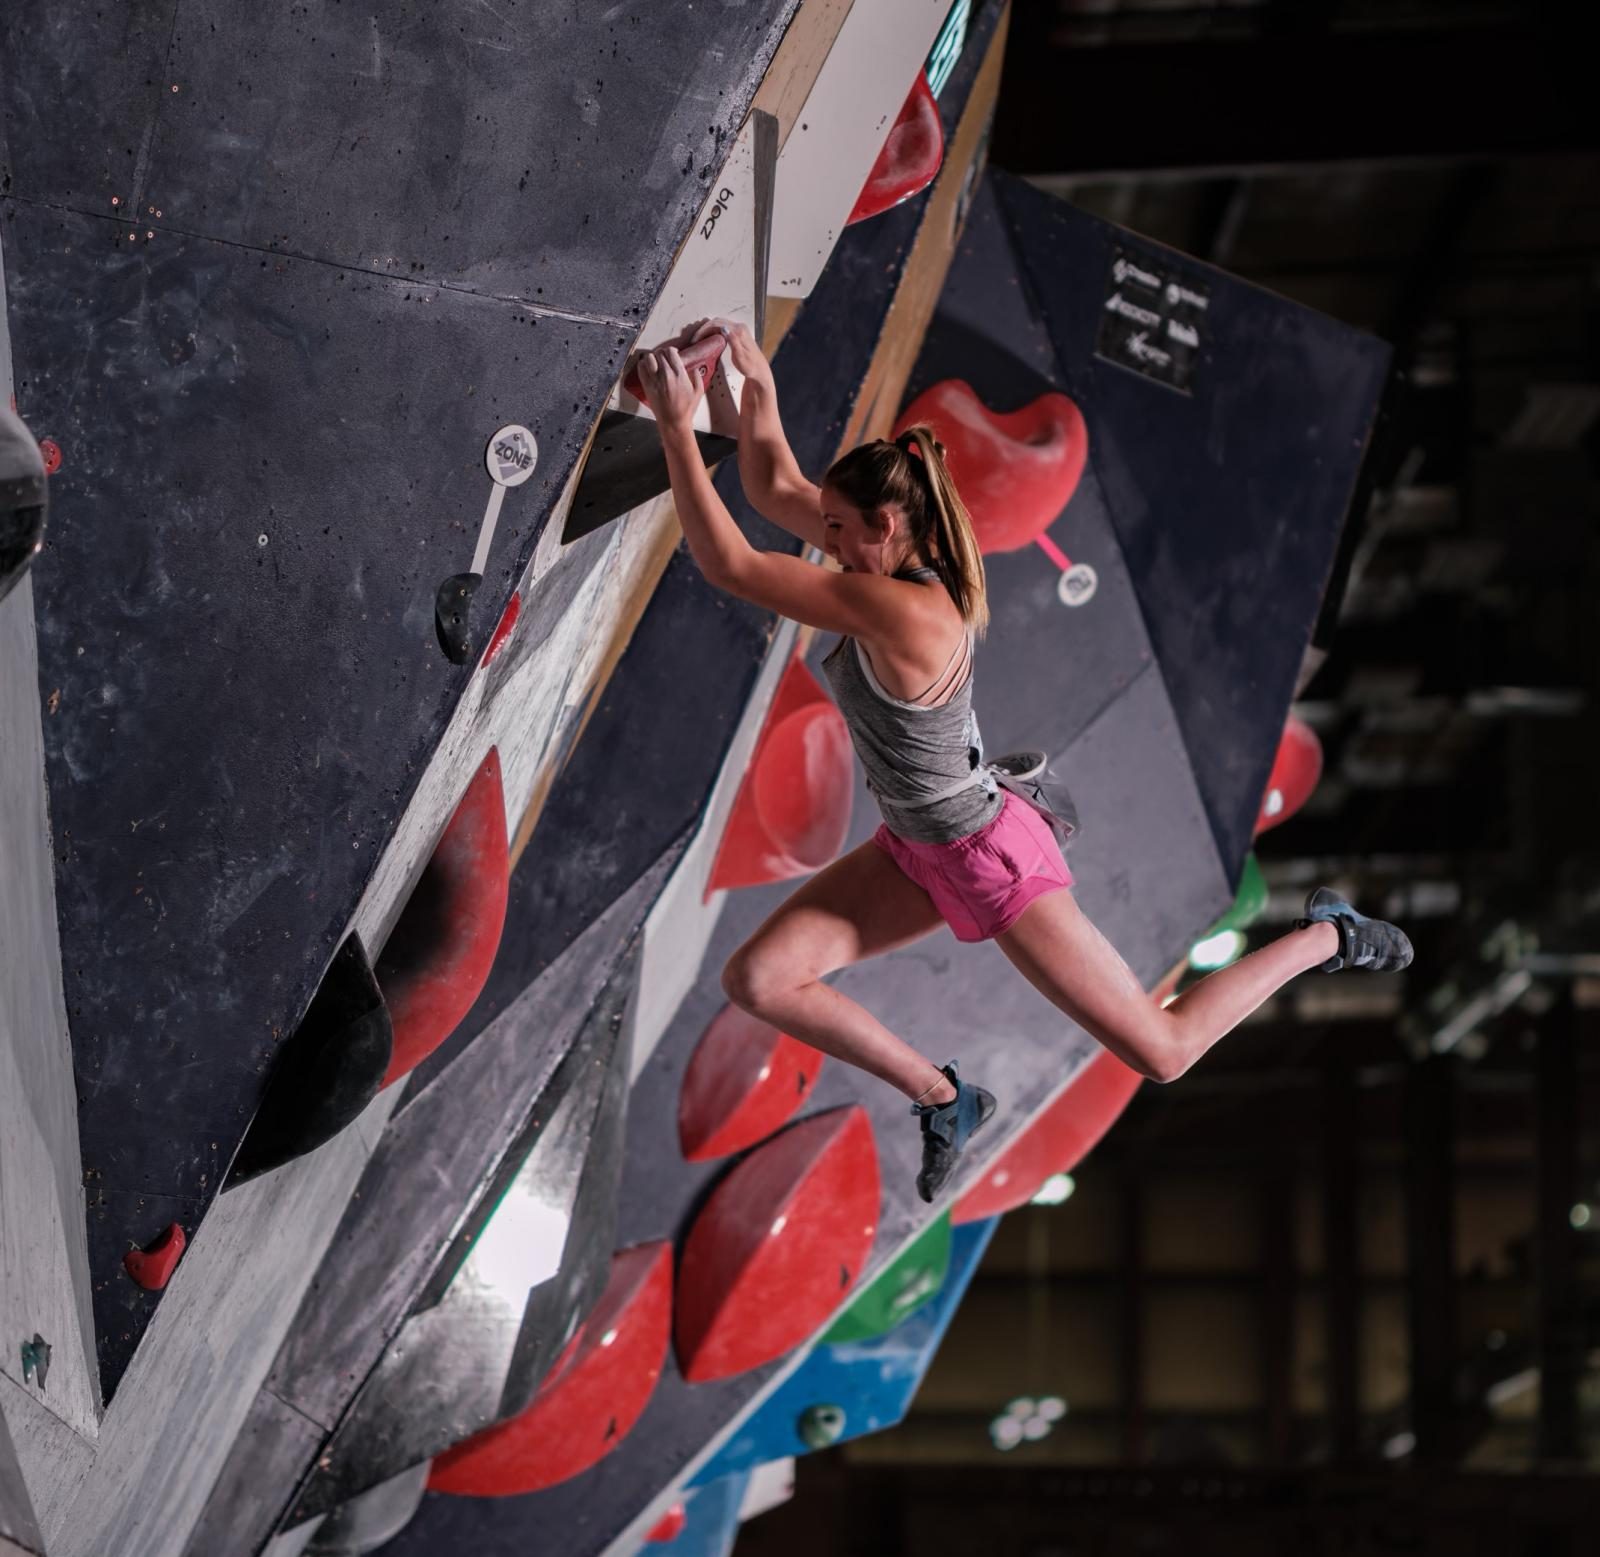 Izzy Orner ‘25 jumps to the next grip during the National Bouldering Championship in Seoul Aug. 27. The National Championship became Orner’s number one priority when she got the chance to compete. “My favorite part about competing was the energy in the crowd for everyone on the wall,” Orner said. 